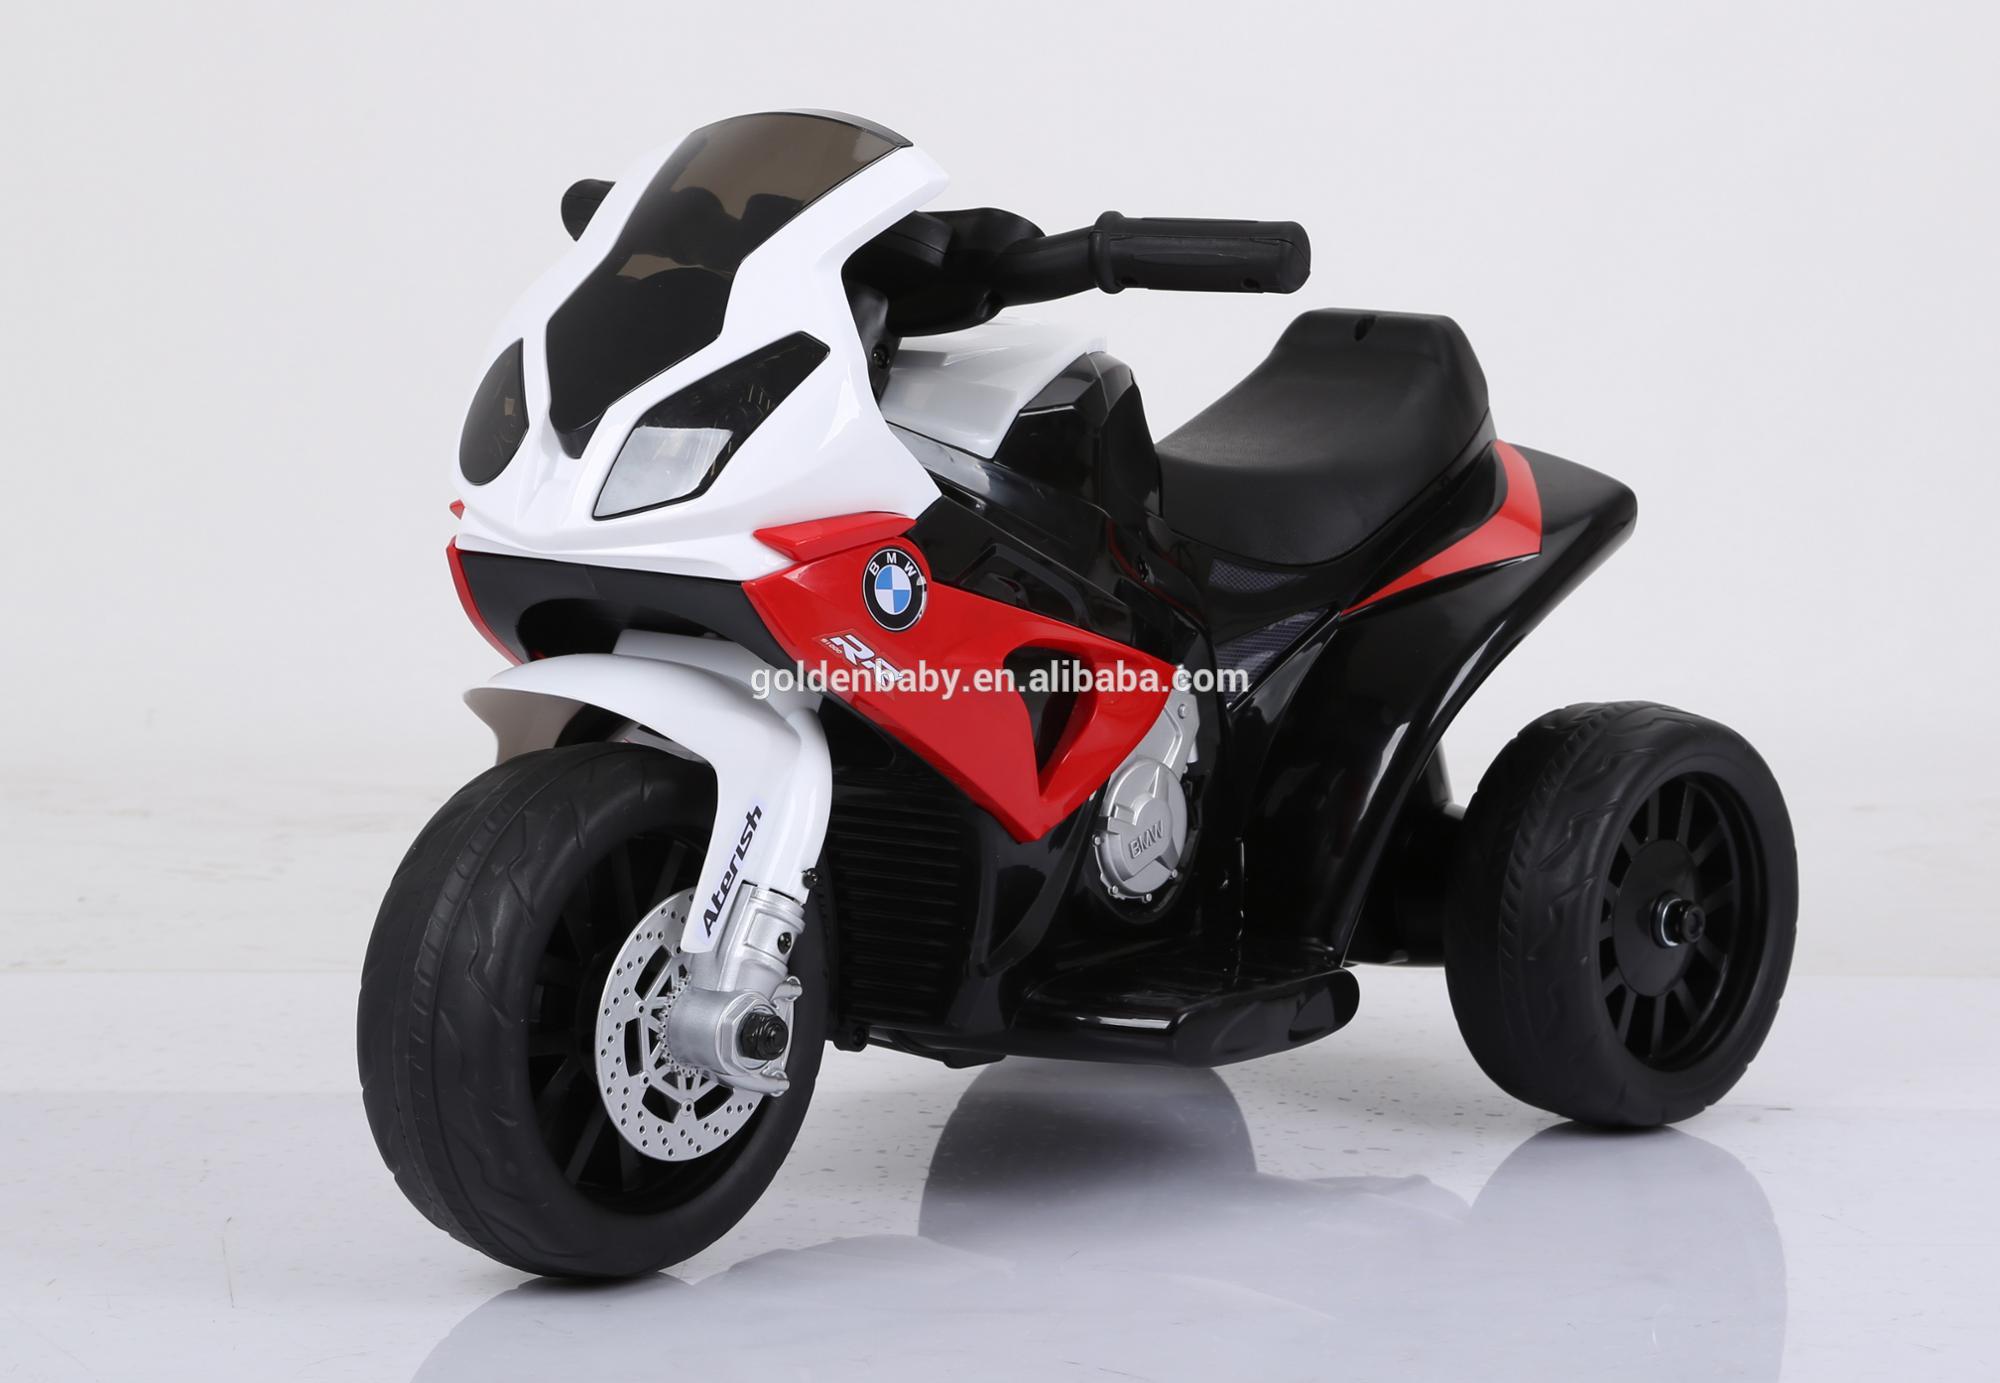 Licensed Ride On Car Toy Motorcycle For Children Jt5188 - Buy Ride ...